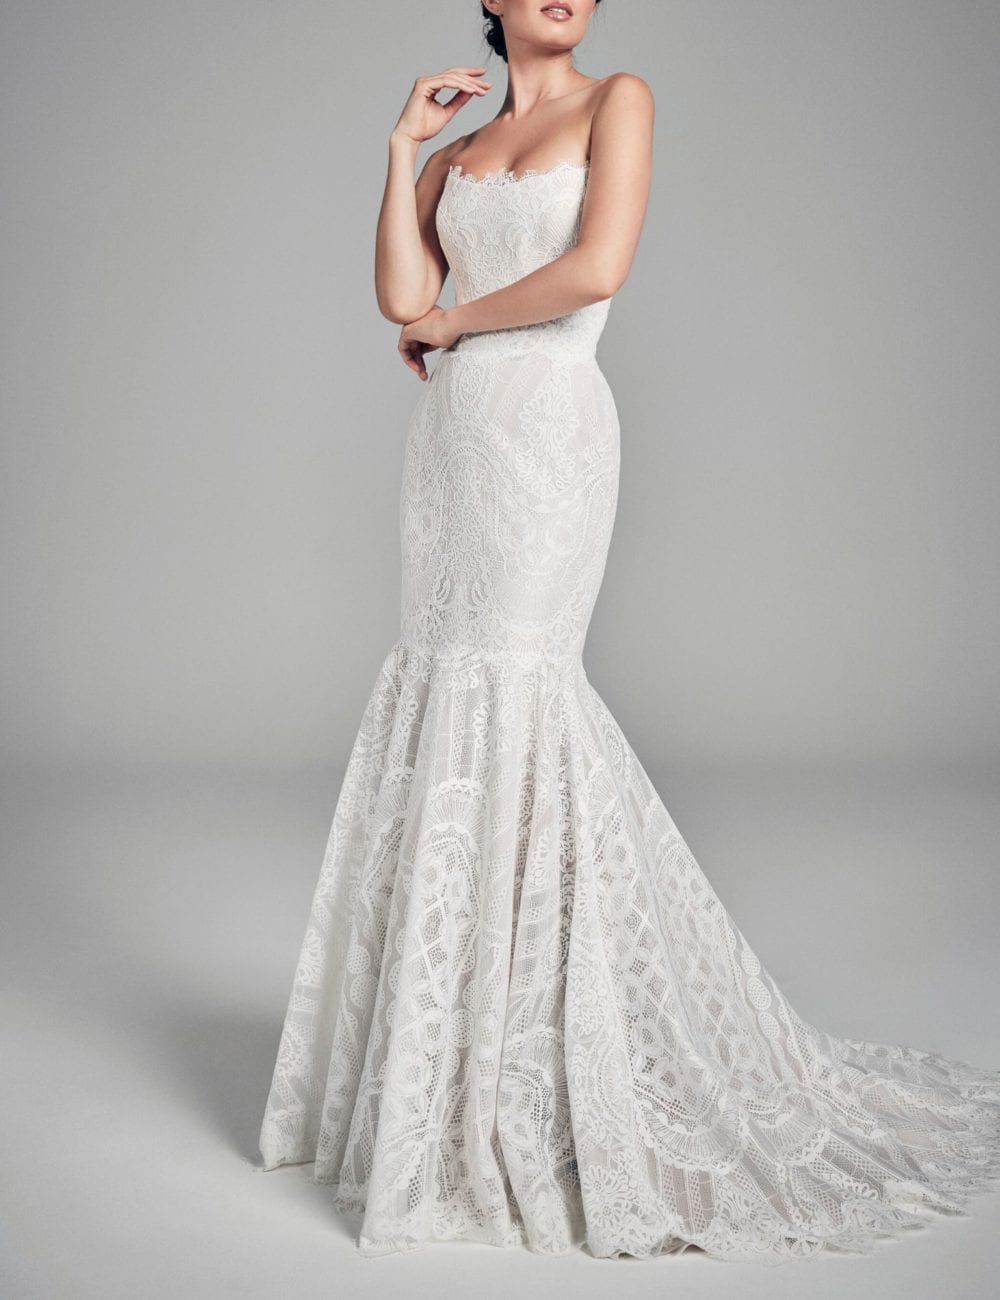 lovelybride suzanneneville orchid front 04874